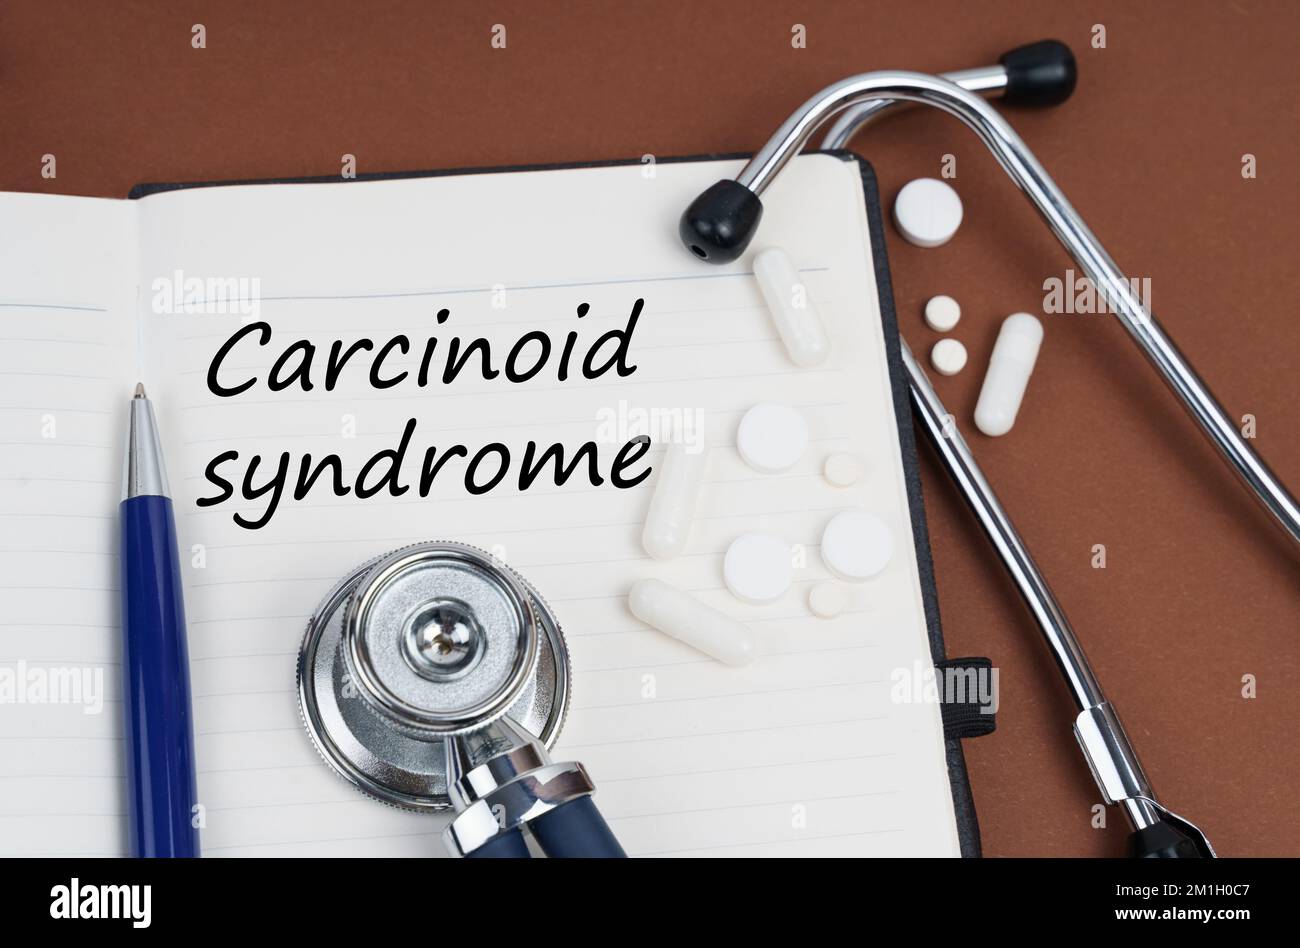 Medicine and health concept. On a brown surface lie pills, a pen, a stethoscope and a notebook with the inscription - Carcinoid syndrome Stock Photo